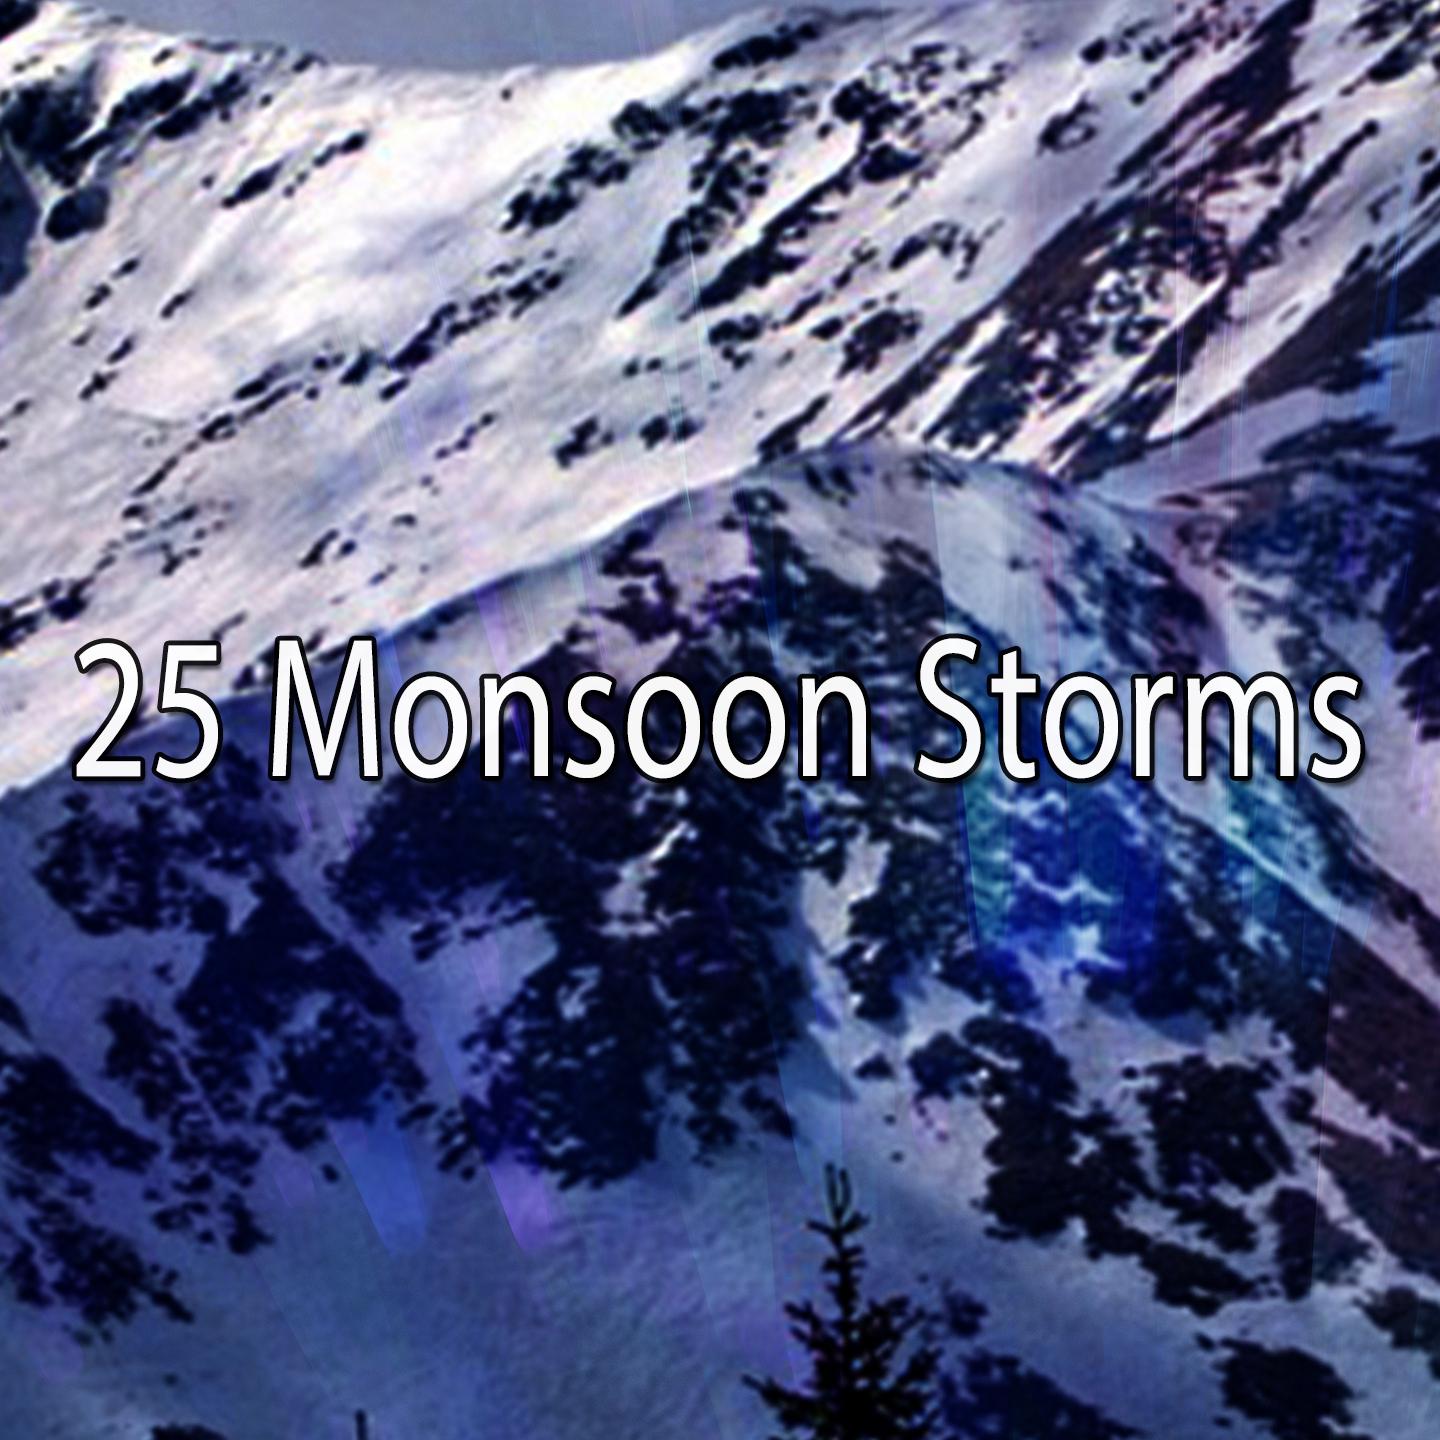 25 Monsoon Storms